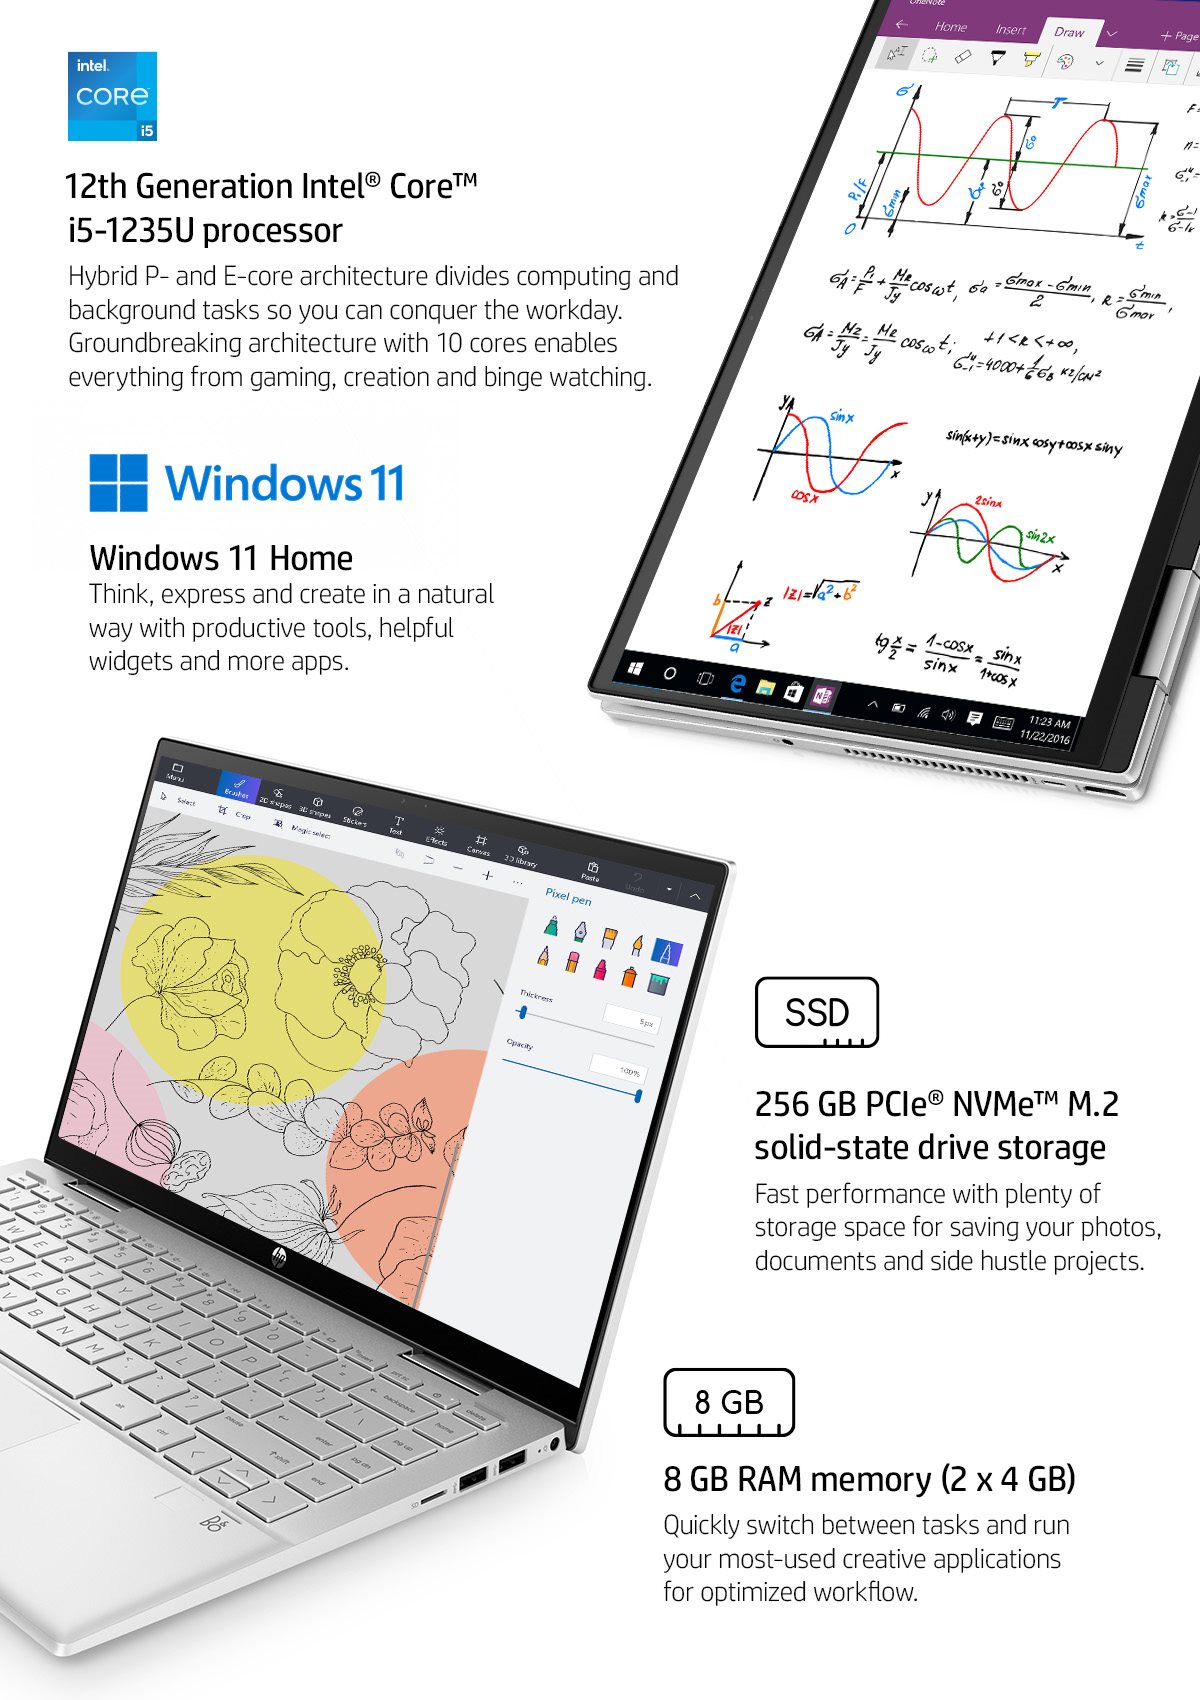 Pavilion x360 in tablet mode shows sketched out math notes; in laptop mode it shows sketch drawing of flowers.